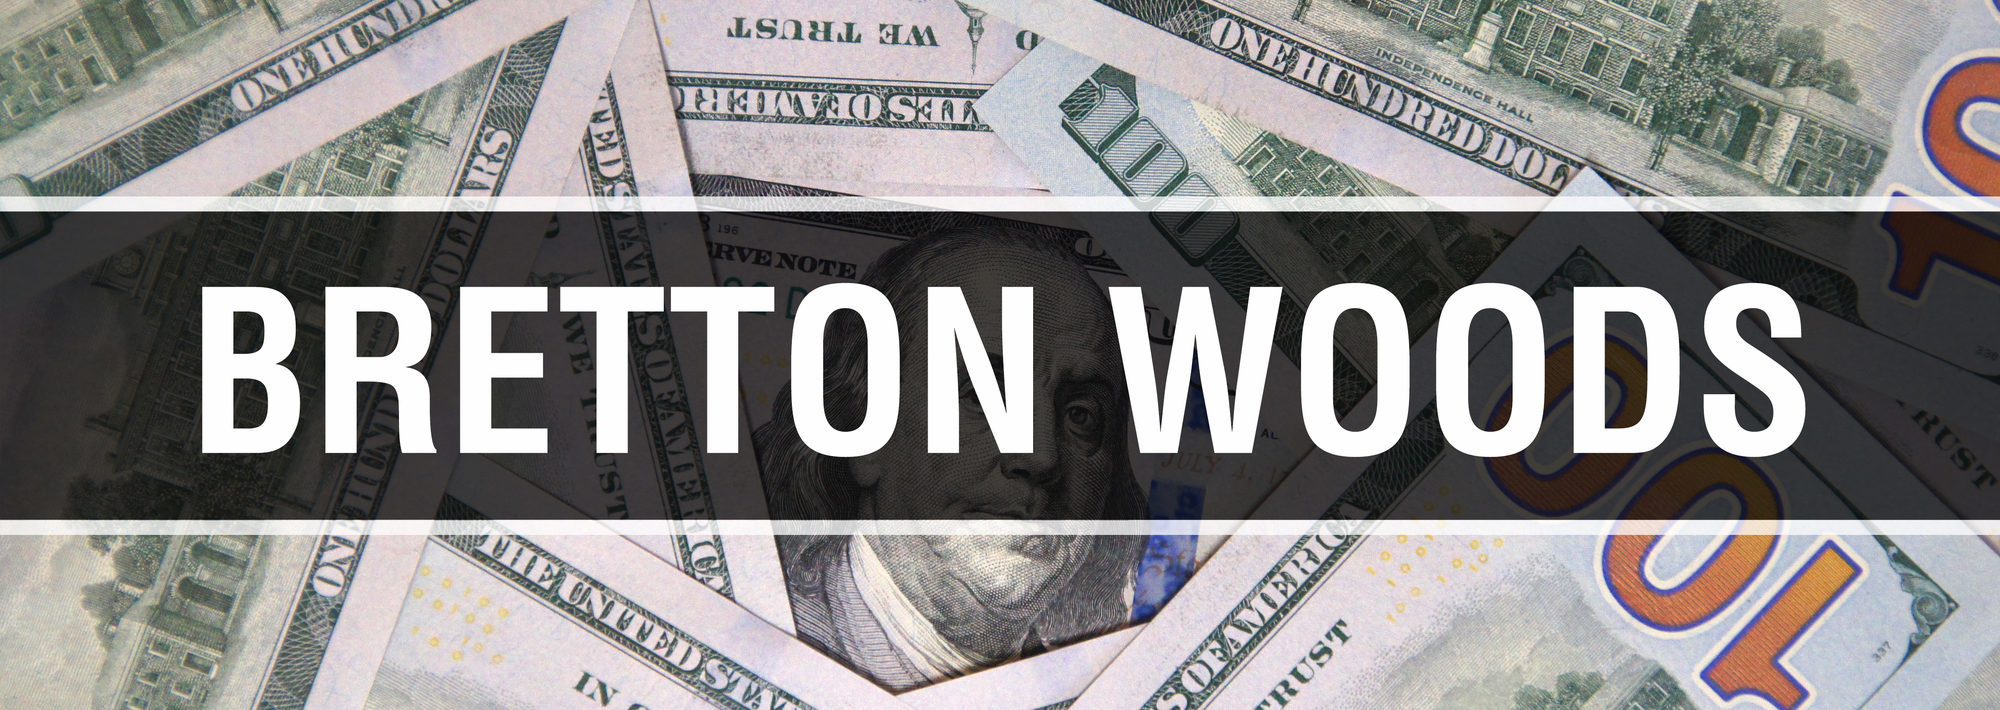 bretton woods and the petrodllar